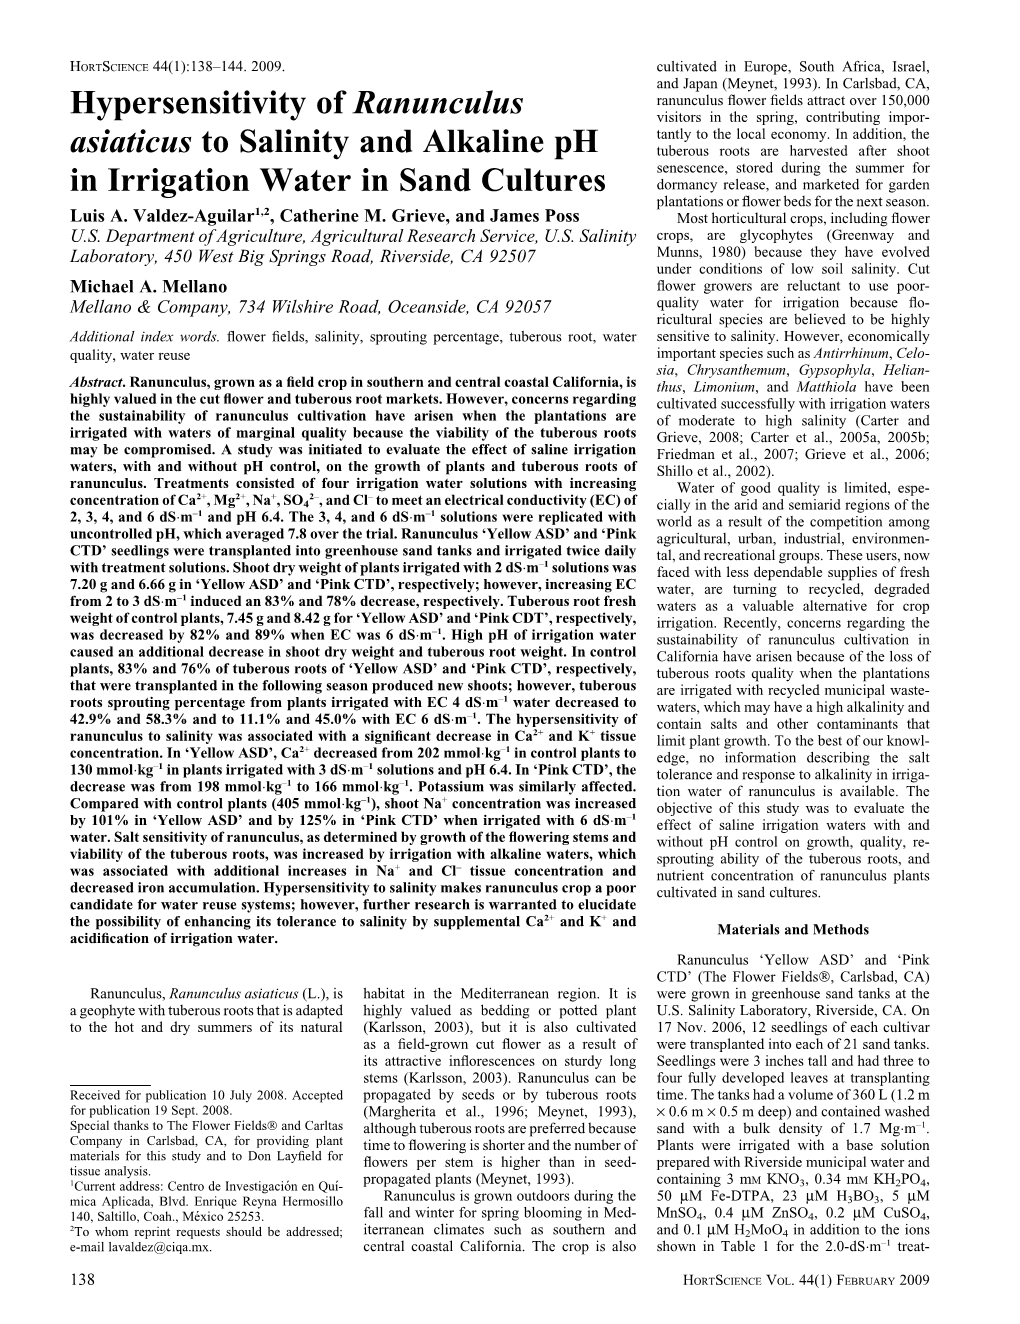 Hypersensitivity of Ranunculus Asiaticus to Salinity and Alkaline Ph in Irrigation Water in Sand Cultures